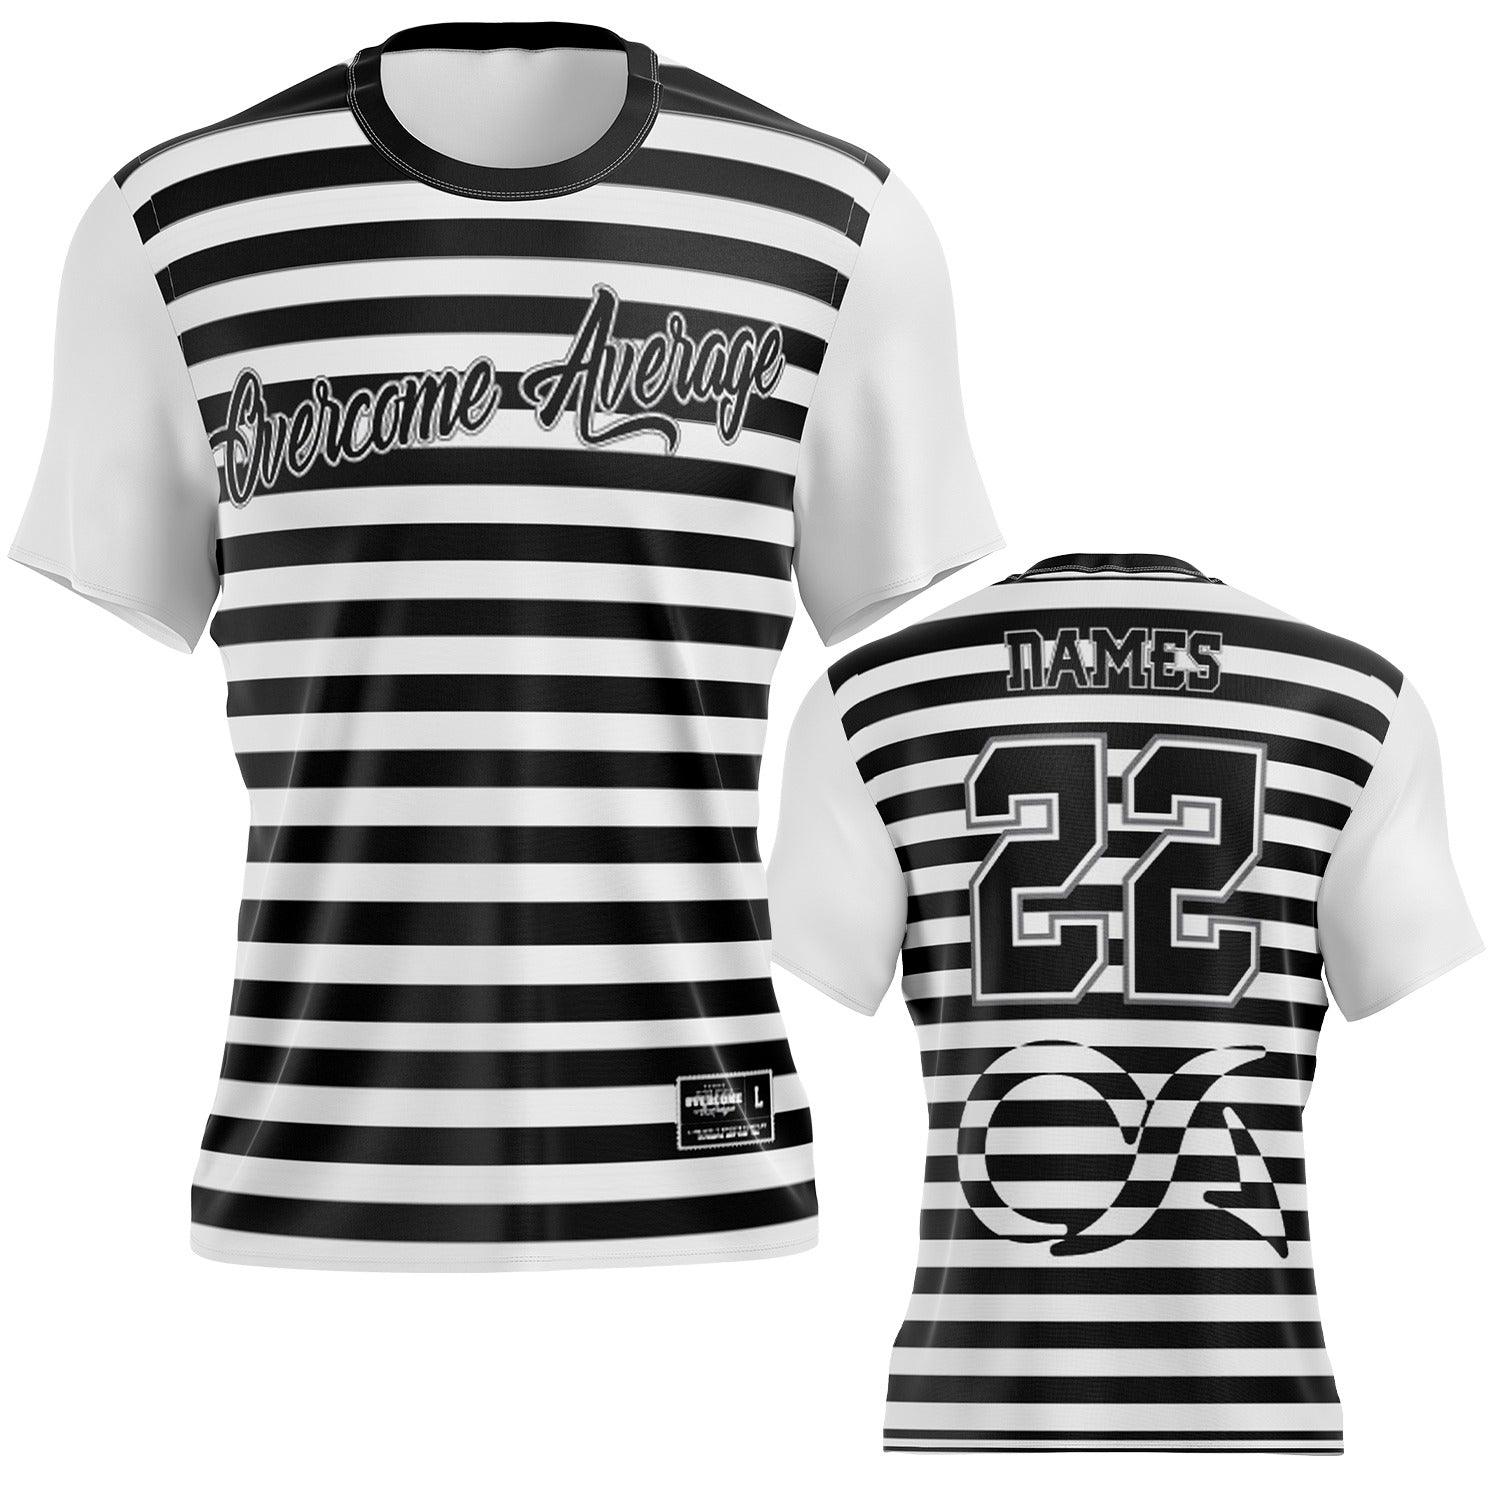 Black/White Fusion - Short Sleeve Jersey (Customized Buy-In) - Smash It Sports